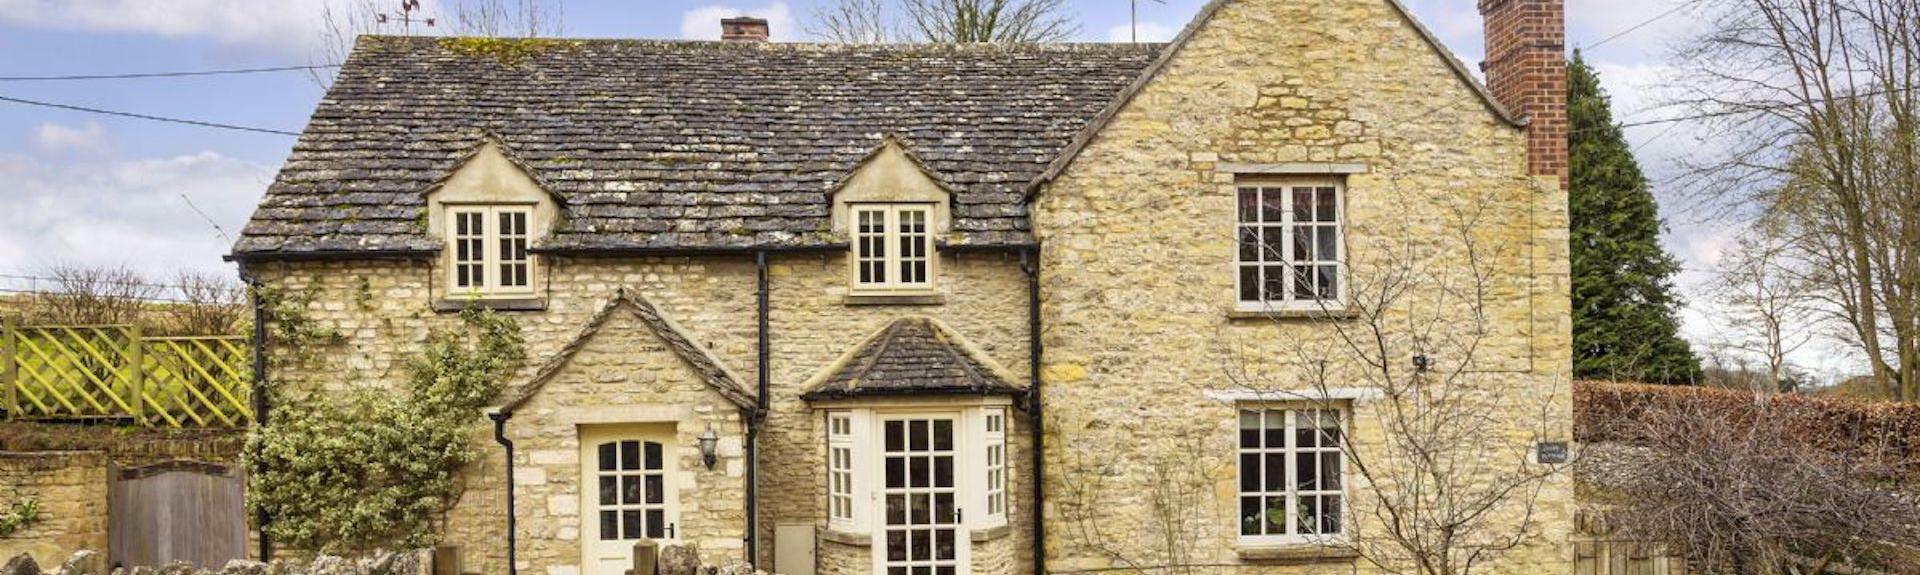 Cotswold cottage exterior with a bay window and low stone garden wall.